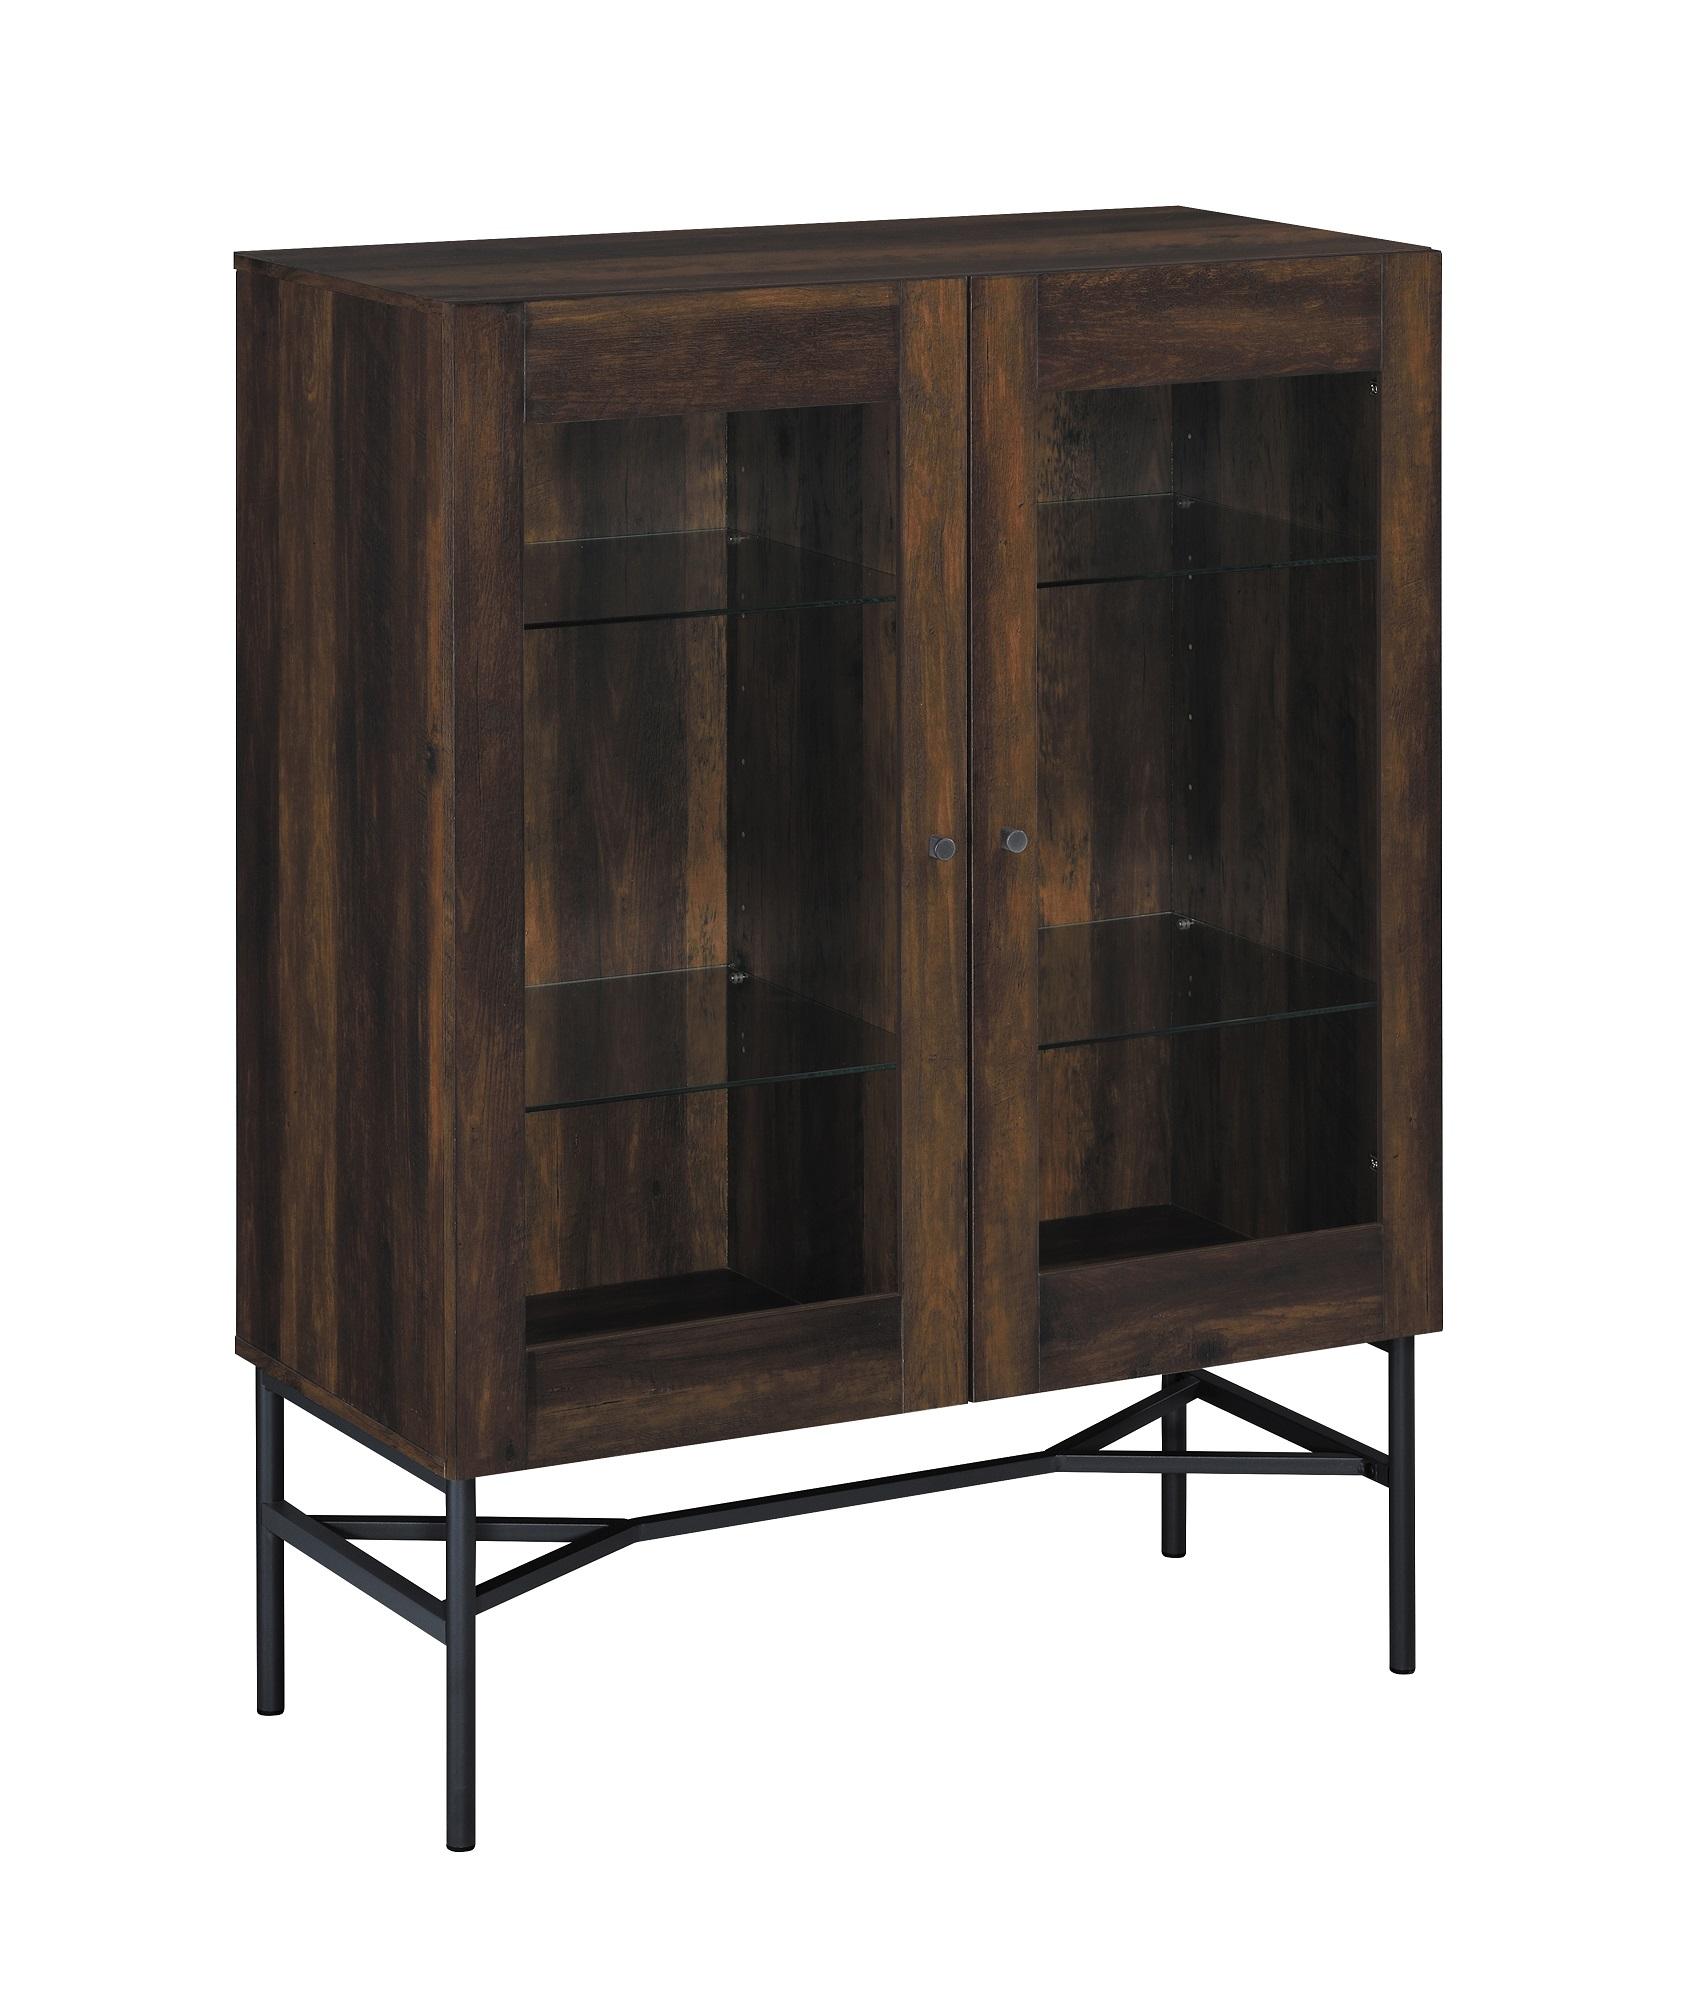 Contemporary Accent Cabinet 959624 959625 in Dark Brown 